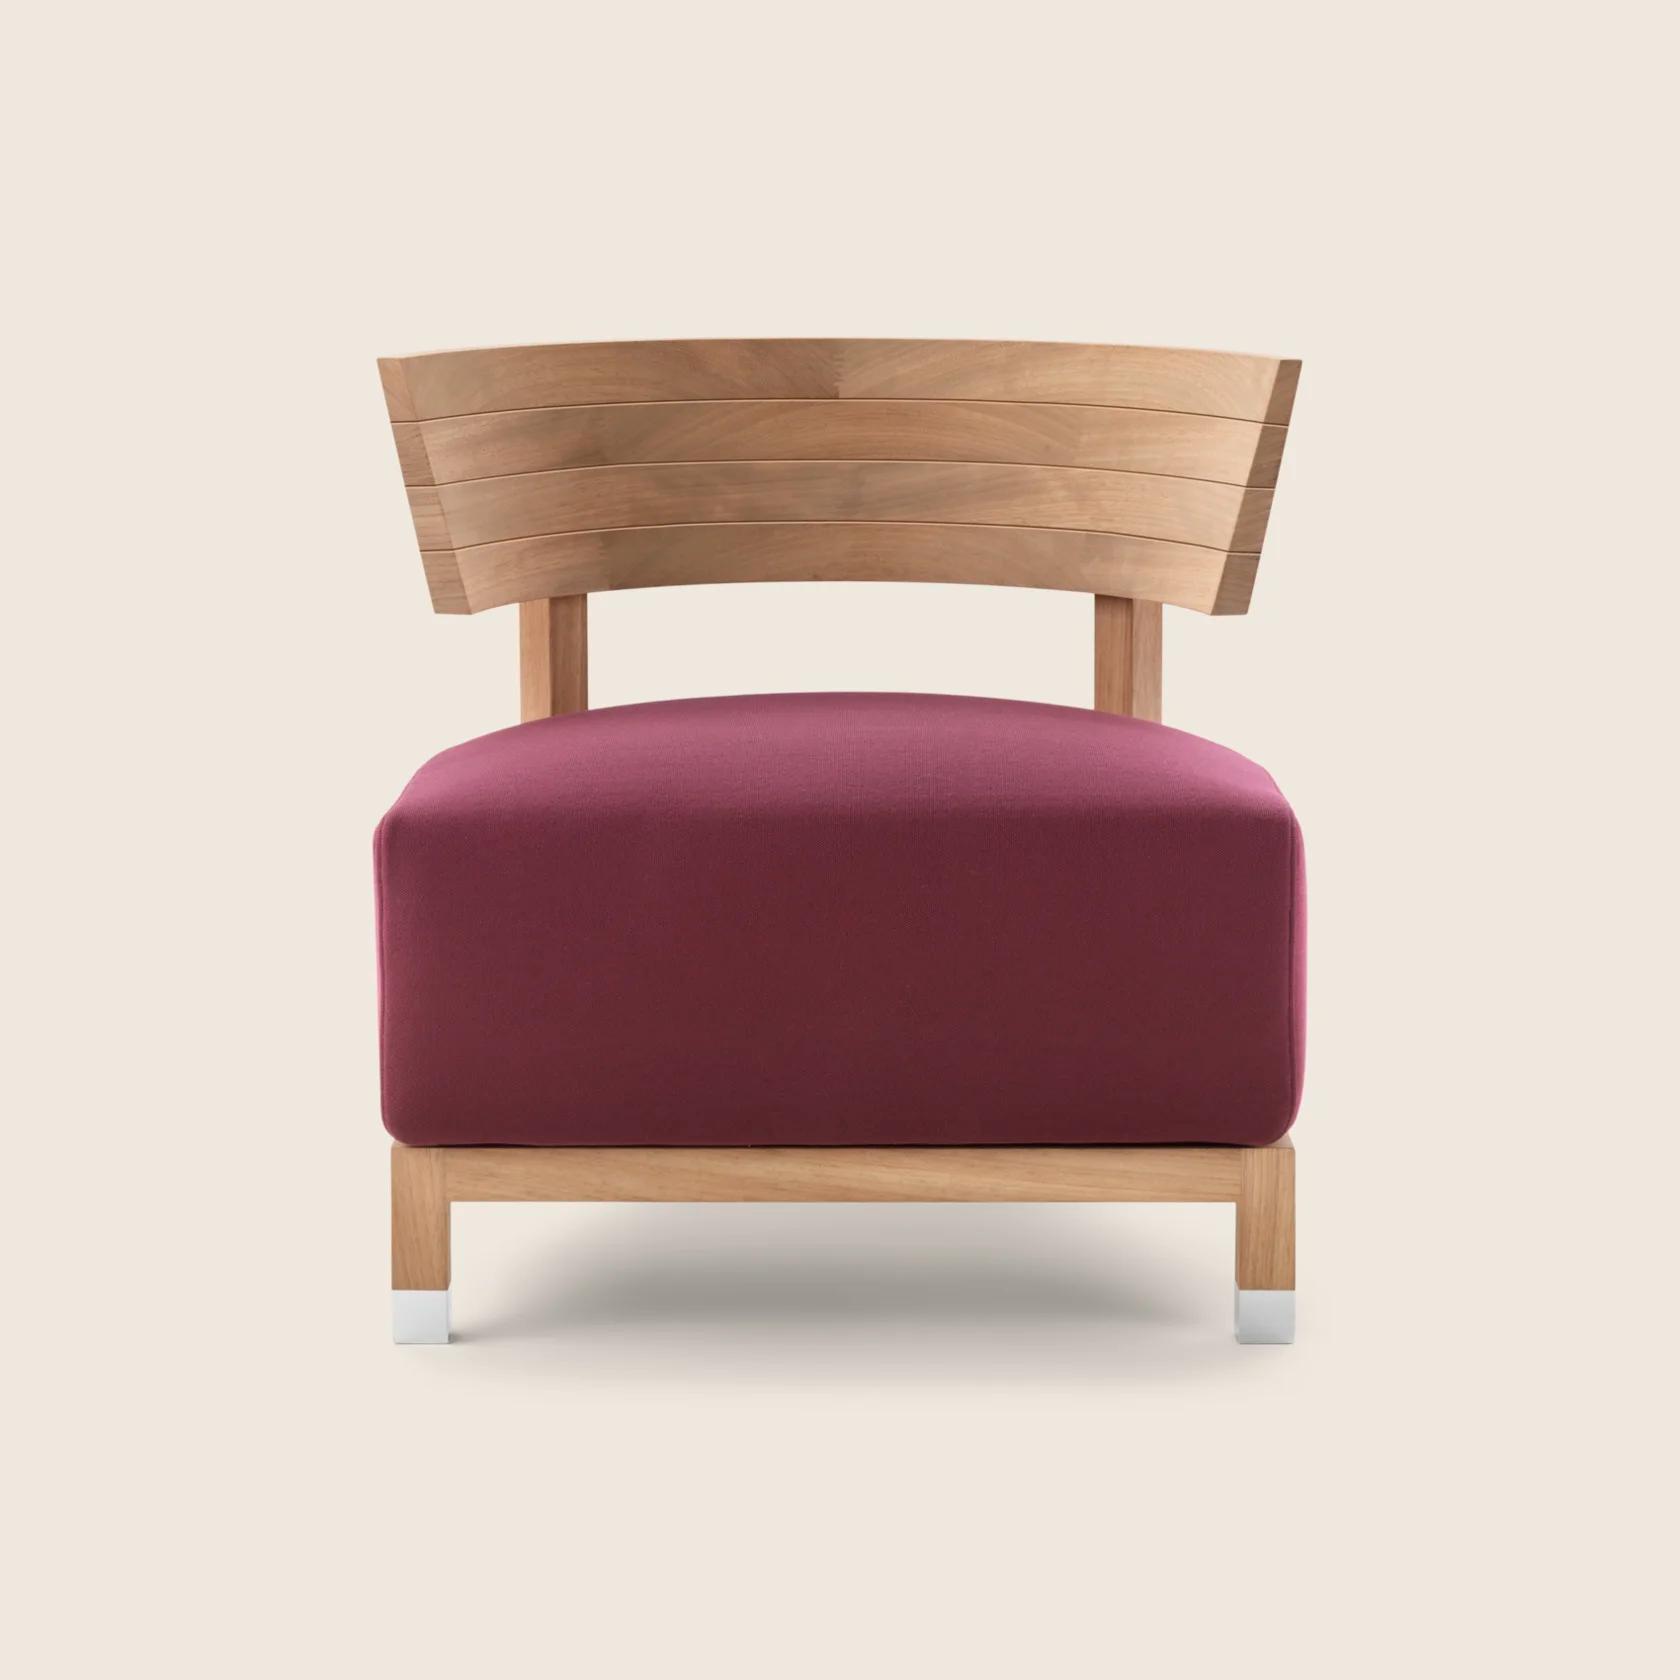 011NA1_THOMAS OUTDOOR_ARMCHAIR_02.png